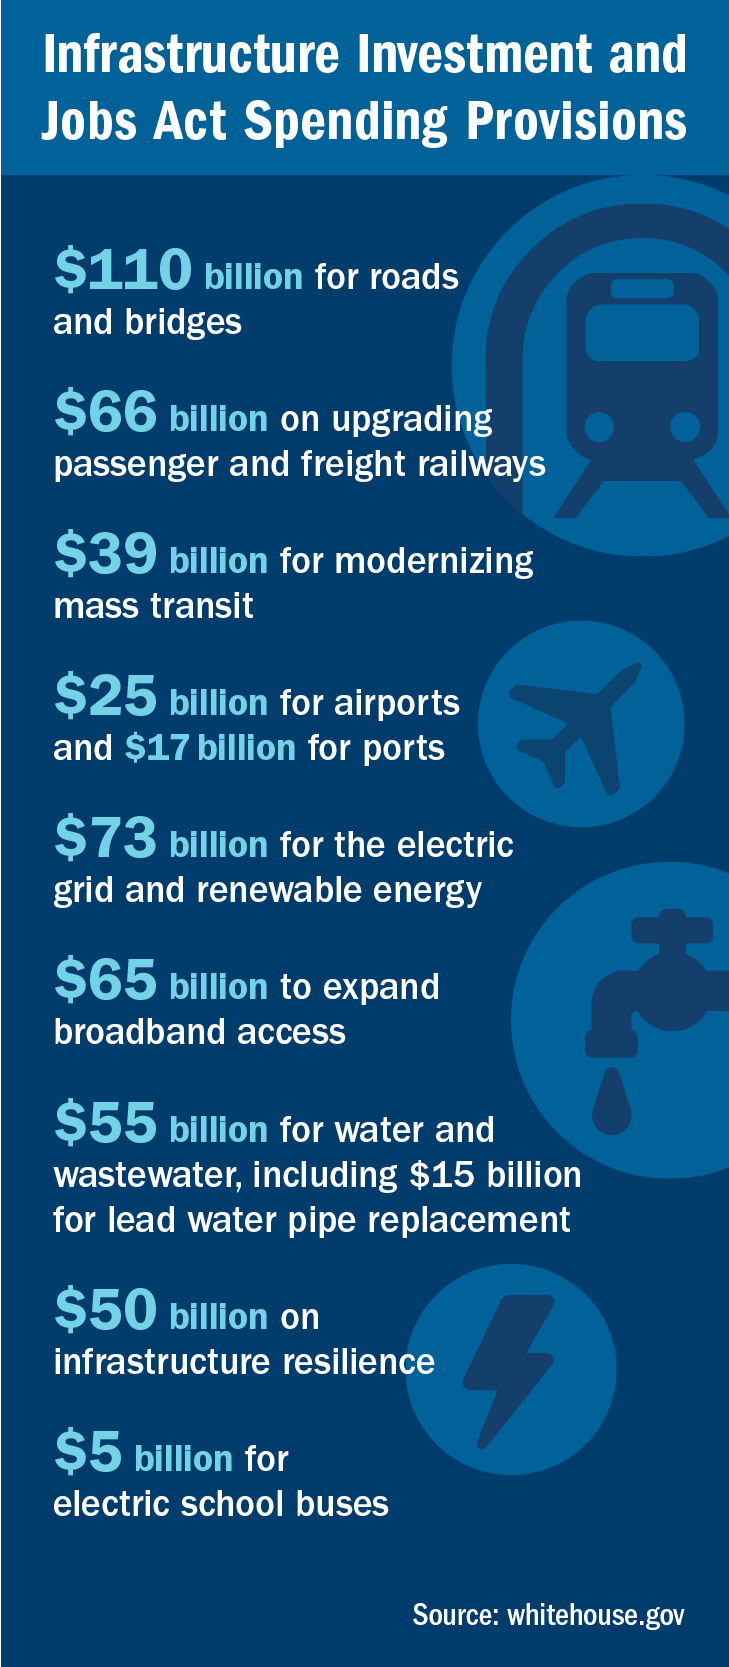 Infrastructure investment and jobs act spending provisions infographic. $110 billion for roads and bridges, $66 million on upgrading passenger and freight railways, $39 billion for modernizing mass transit, $25 billion for airports and $17 billion for ports, $73 billion for the electric grid and renewable energy, $65 billion to expand broadband access, $55 billion for water and wastewater, including $15 billion for lead water pipe replacement, $50 billion on infrastructure resilience, $5 billion for electric school buses